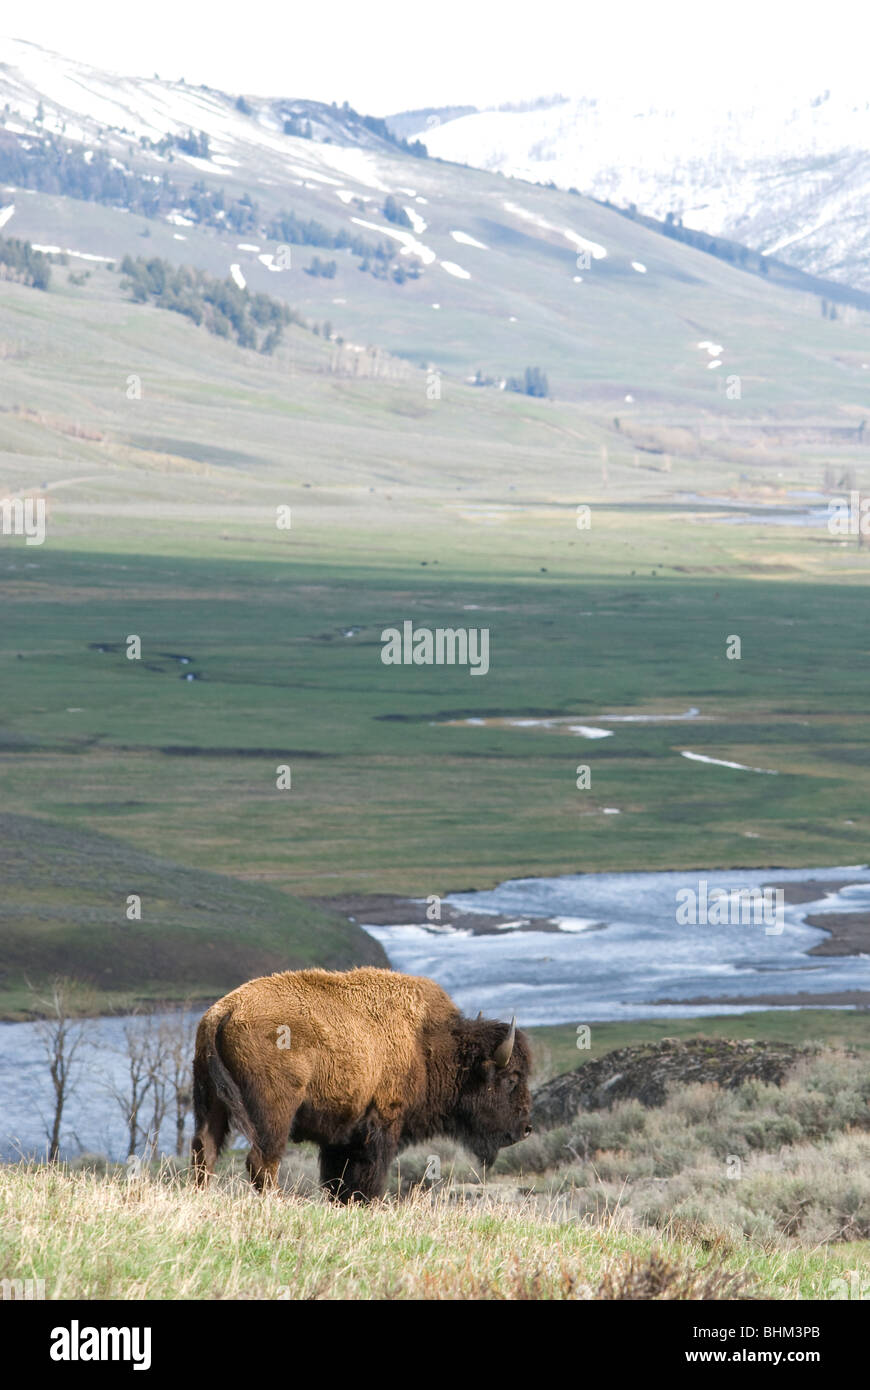 Bison in Lamar valley, Yellowstone National Park Stock Photo